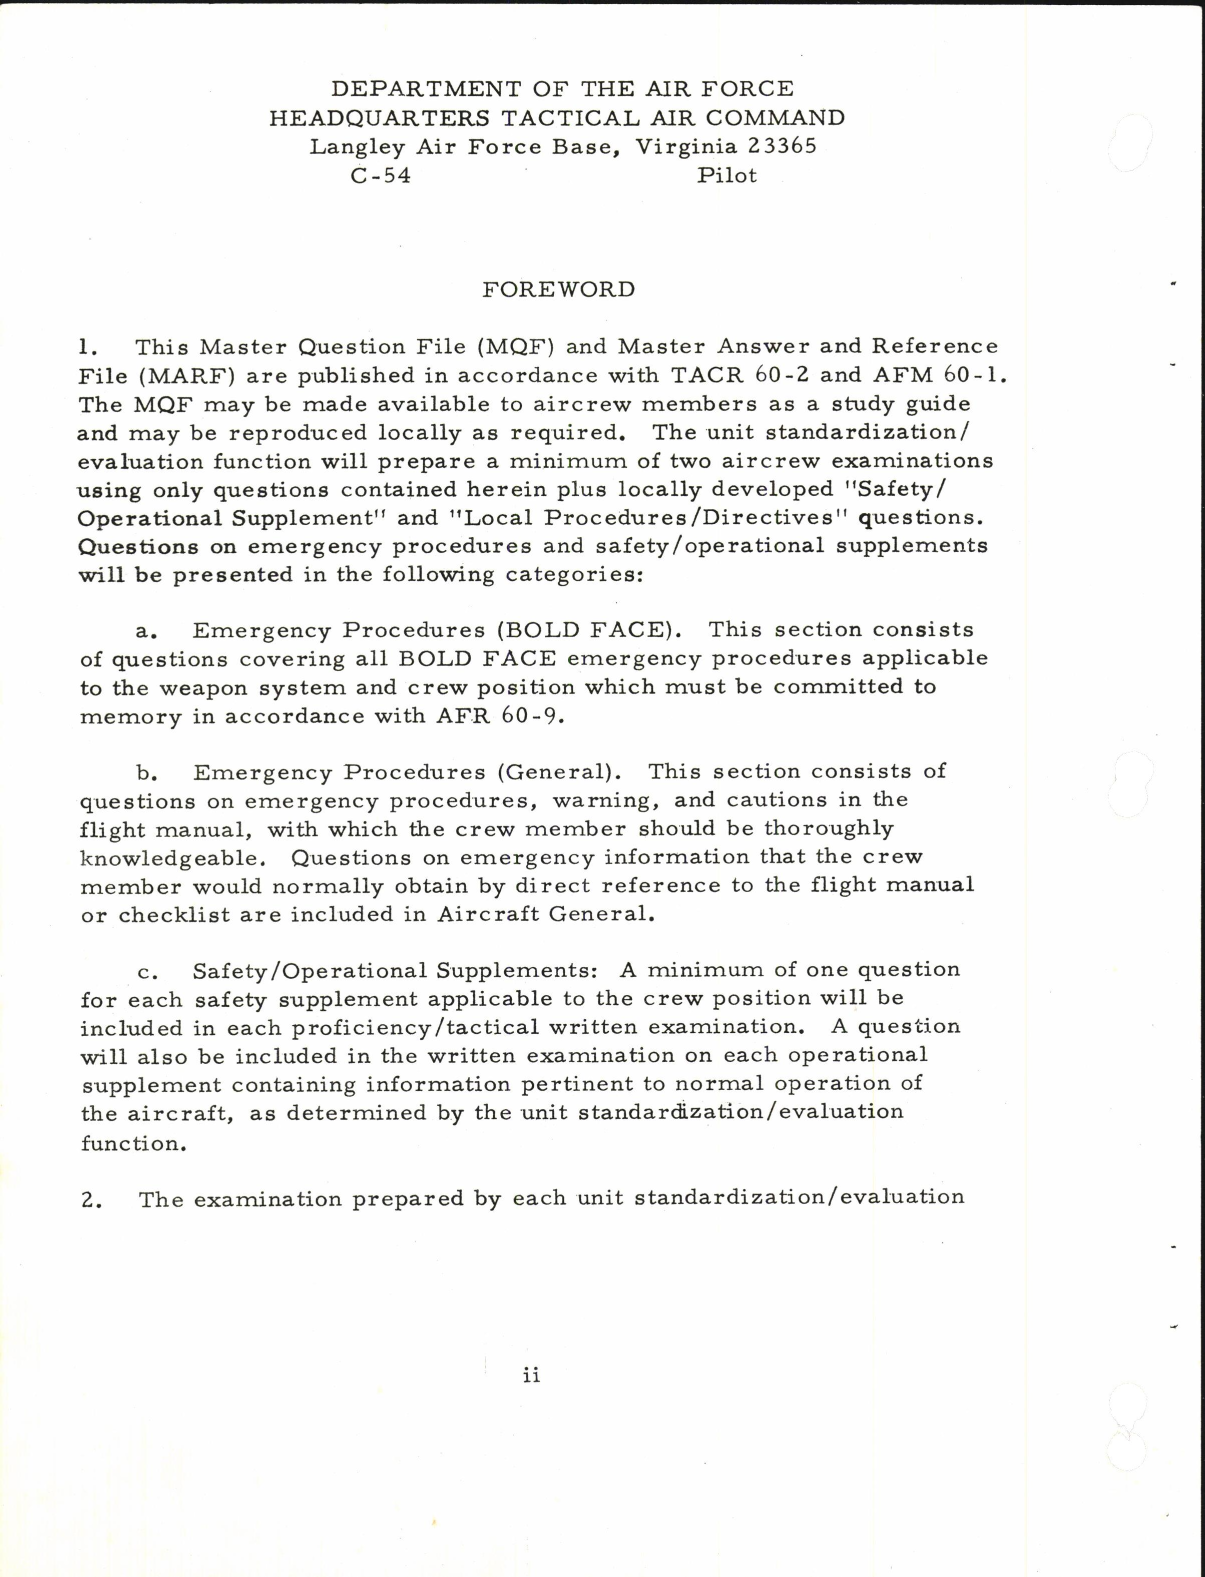 Sample page 6 from AirCorps Library document: C-54 Pilot Master Question File